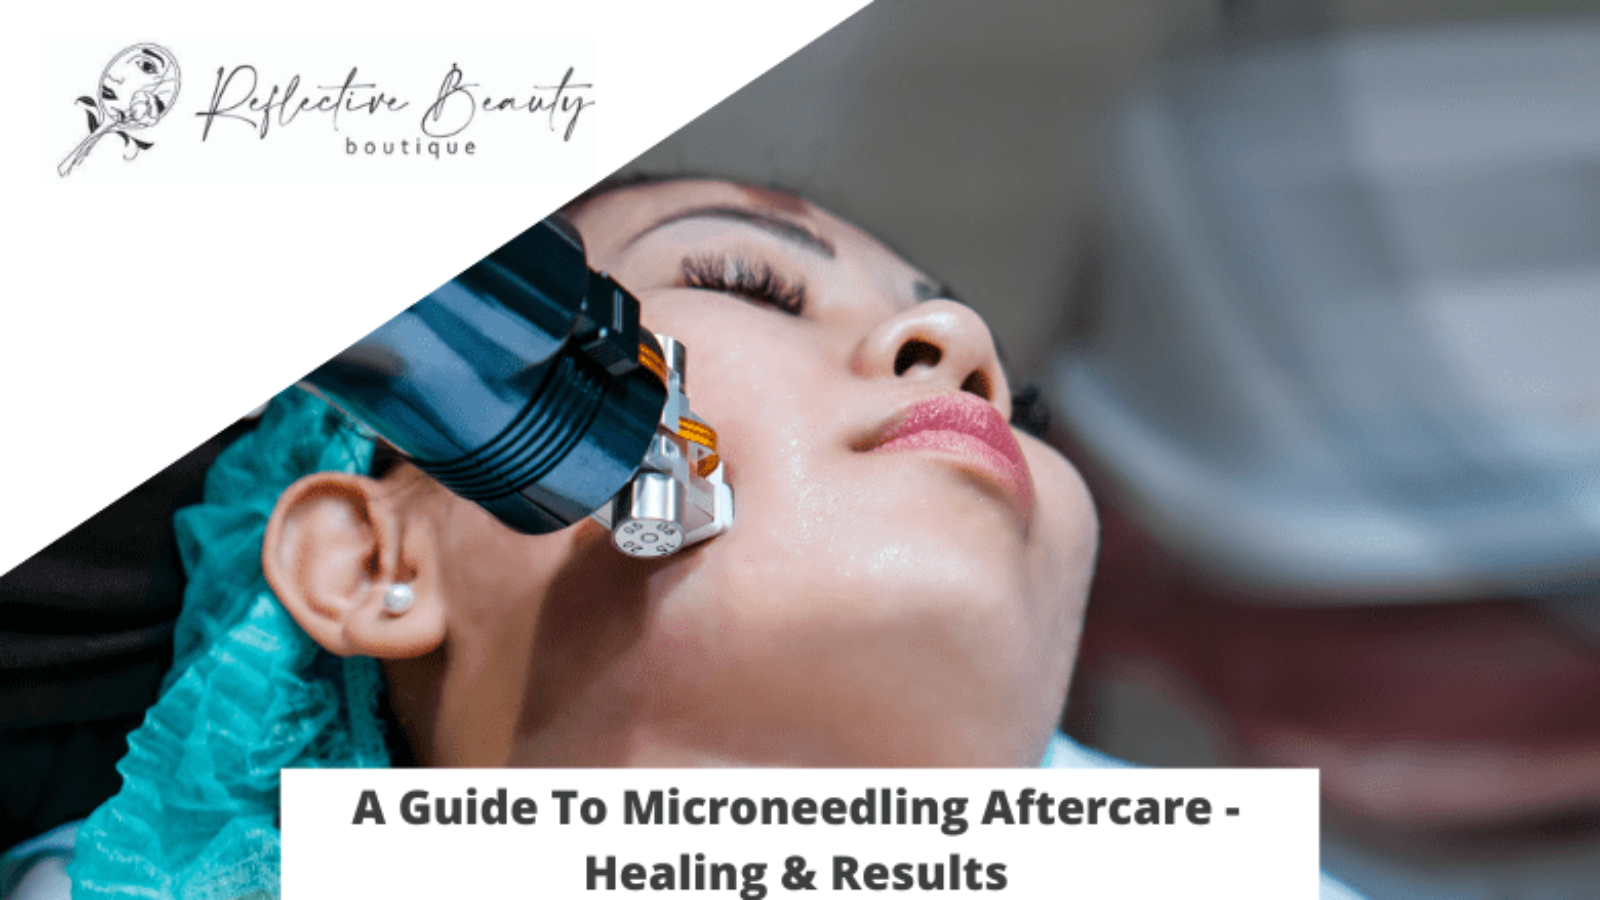 A Guide To Microneedling Aftercare - Healing & Results